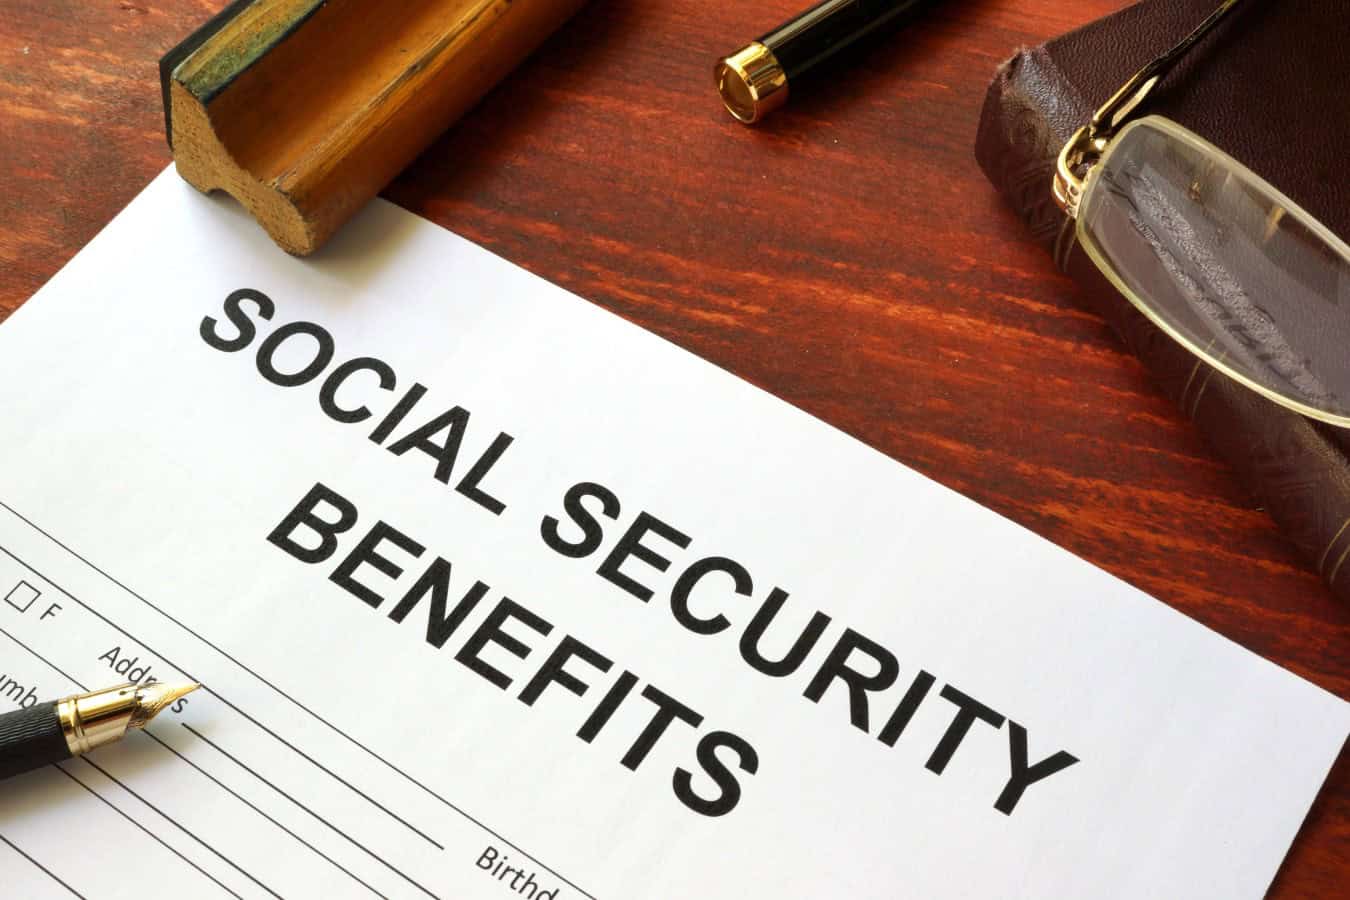 Social security benefits form, book and glasses